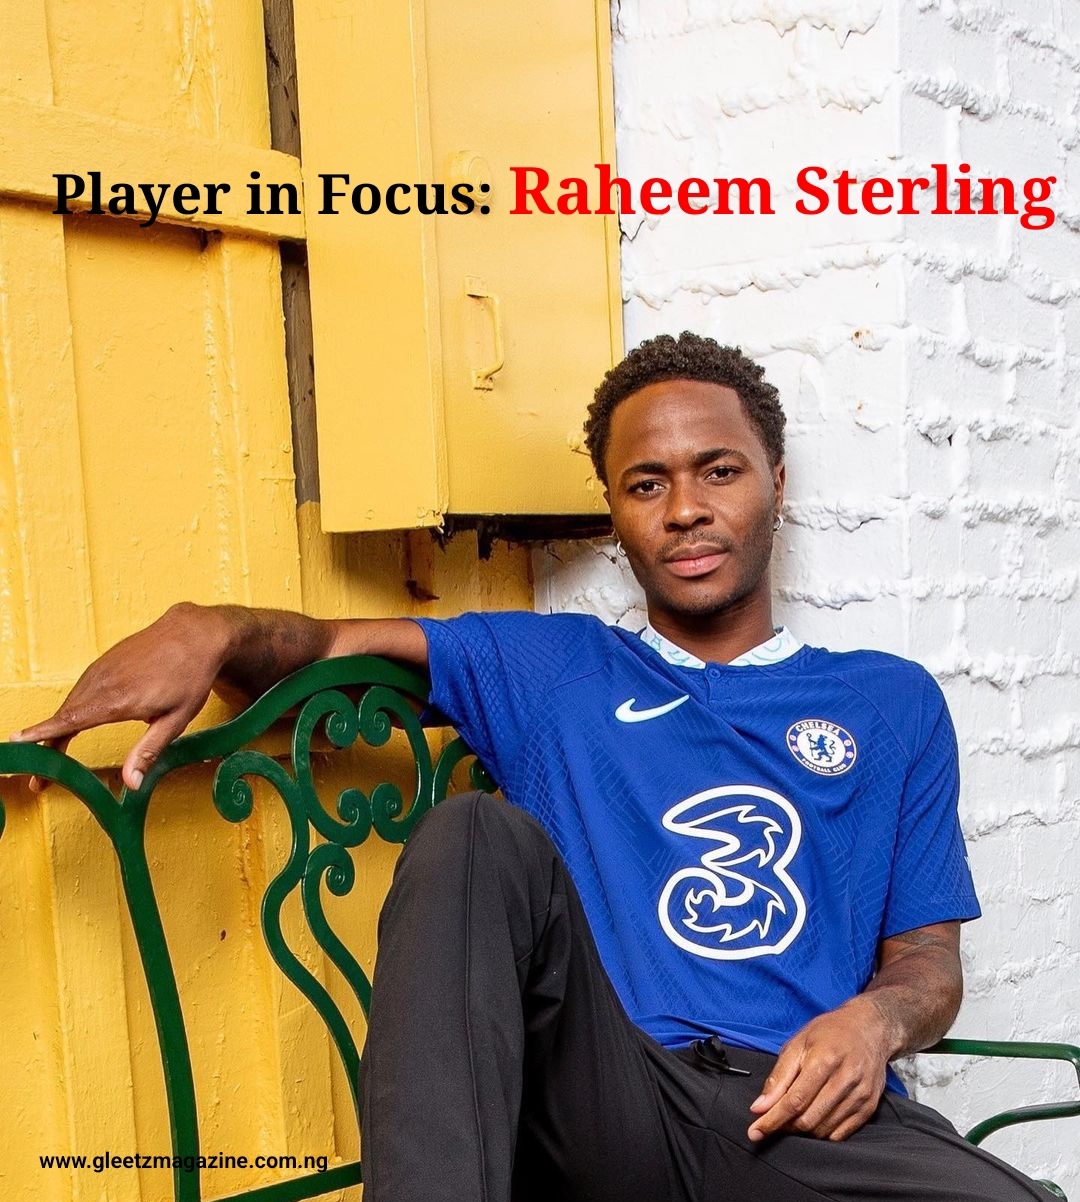 Player in Focus: What does Sterling bring to Chelsea?